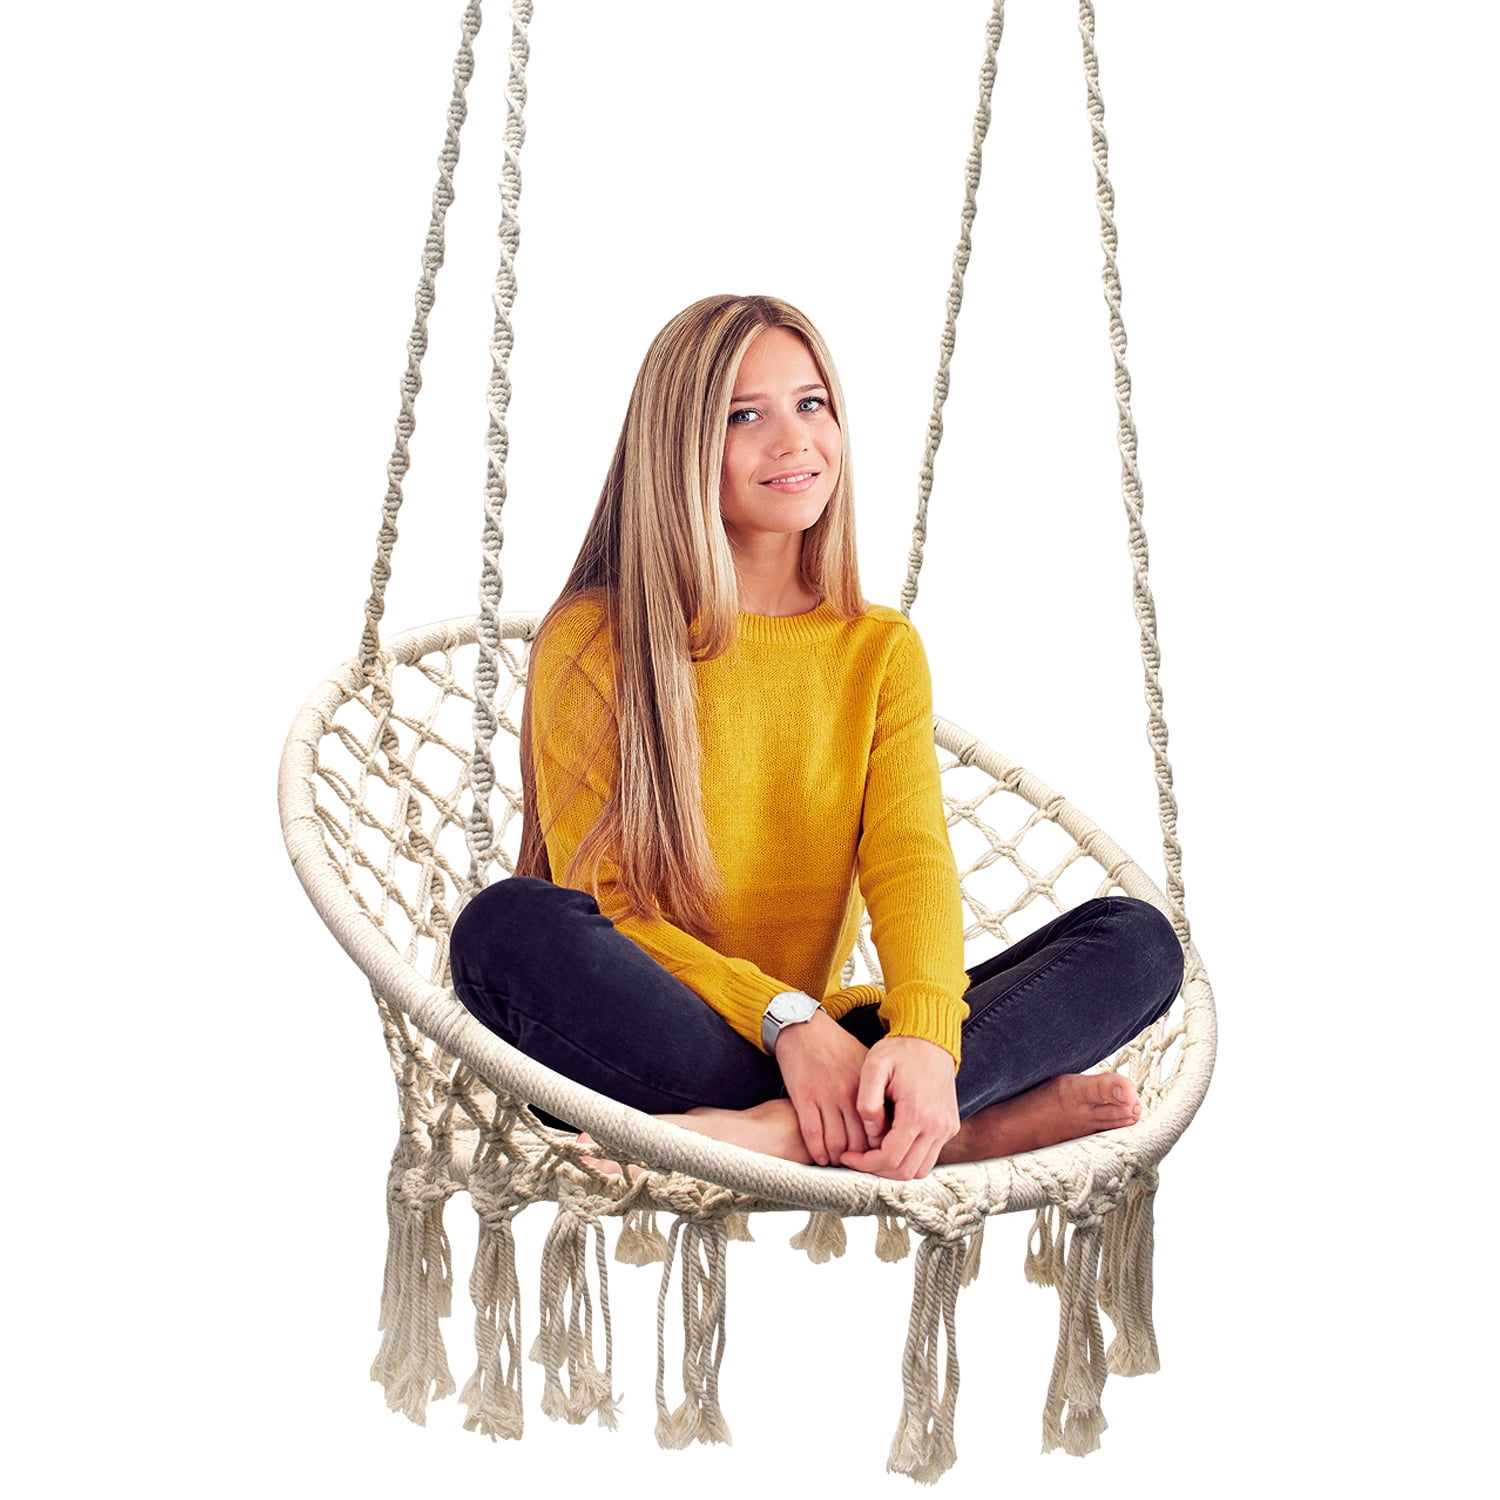 Home Balcony Indoor Garden Bedroom Hanging Chair for Child and Adult Swinging Single Safety Chair with Bracket 160cm with Steel Stand in Random Color Sondre Camping Lightweight Hammock Chair